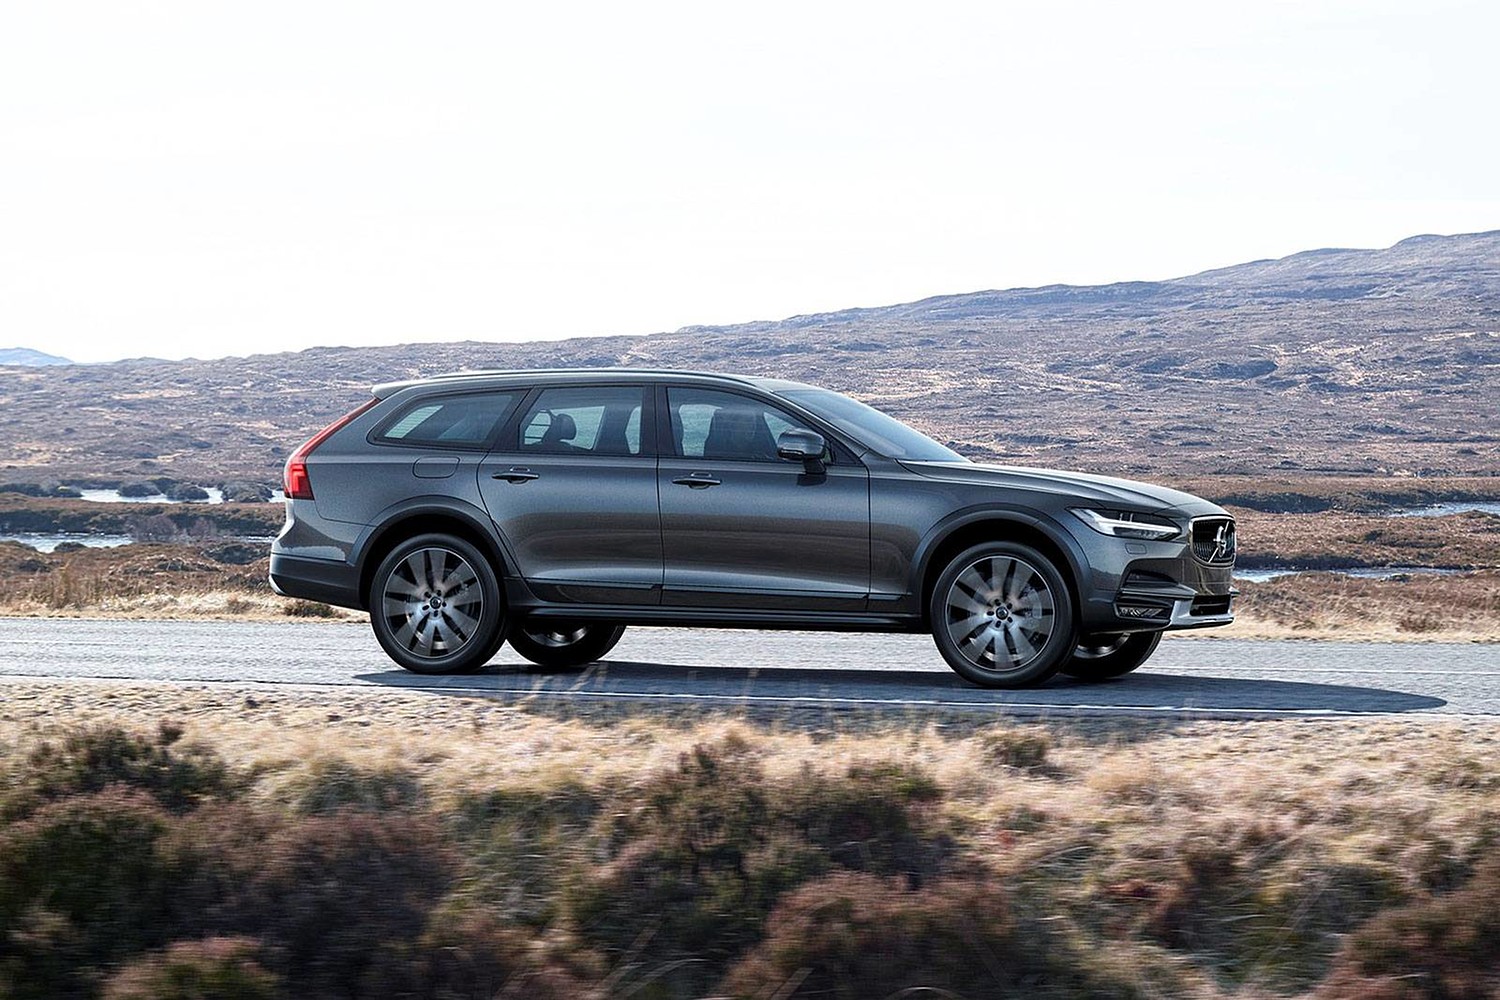 2018 Volvo V90 Cross Country T6 Wagon Exterior Shown